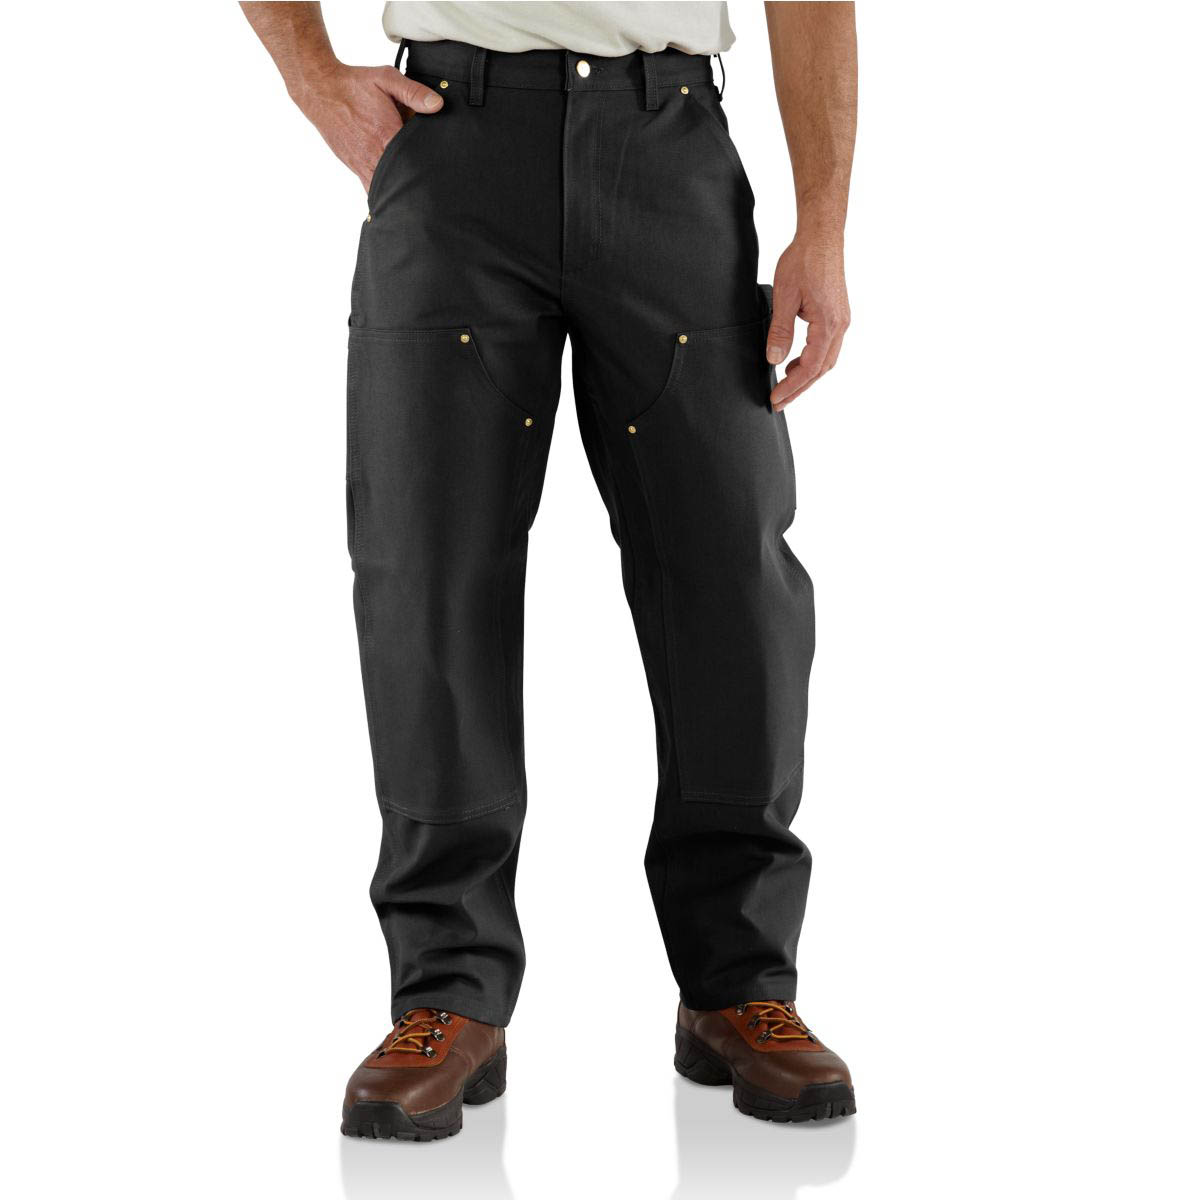 The 12 Best Double Knee Pants for Work & Everyday Wear – Dovetail